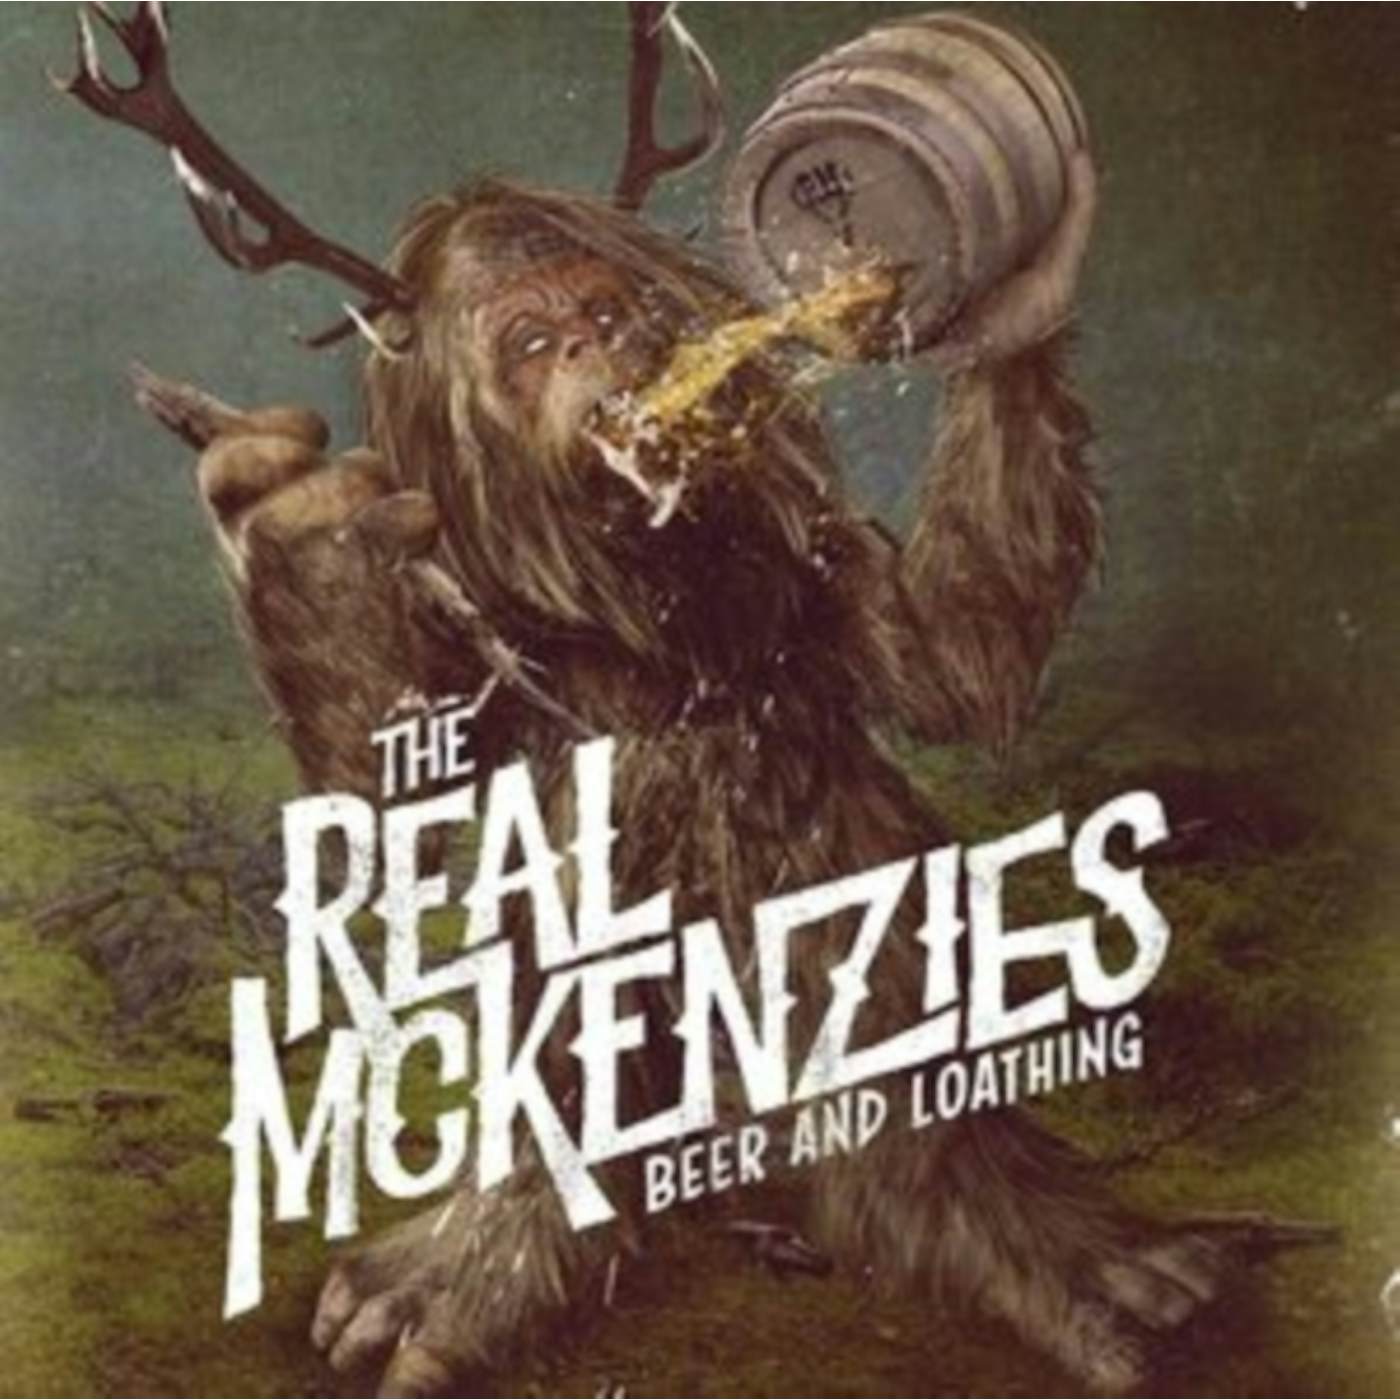 The Real McKenzies Beer and Loathing Vinyl Record